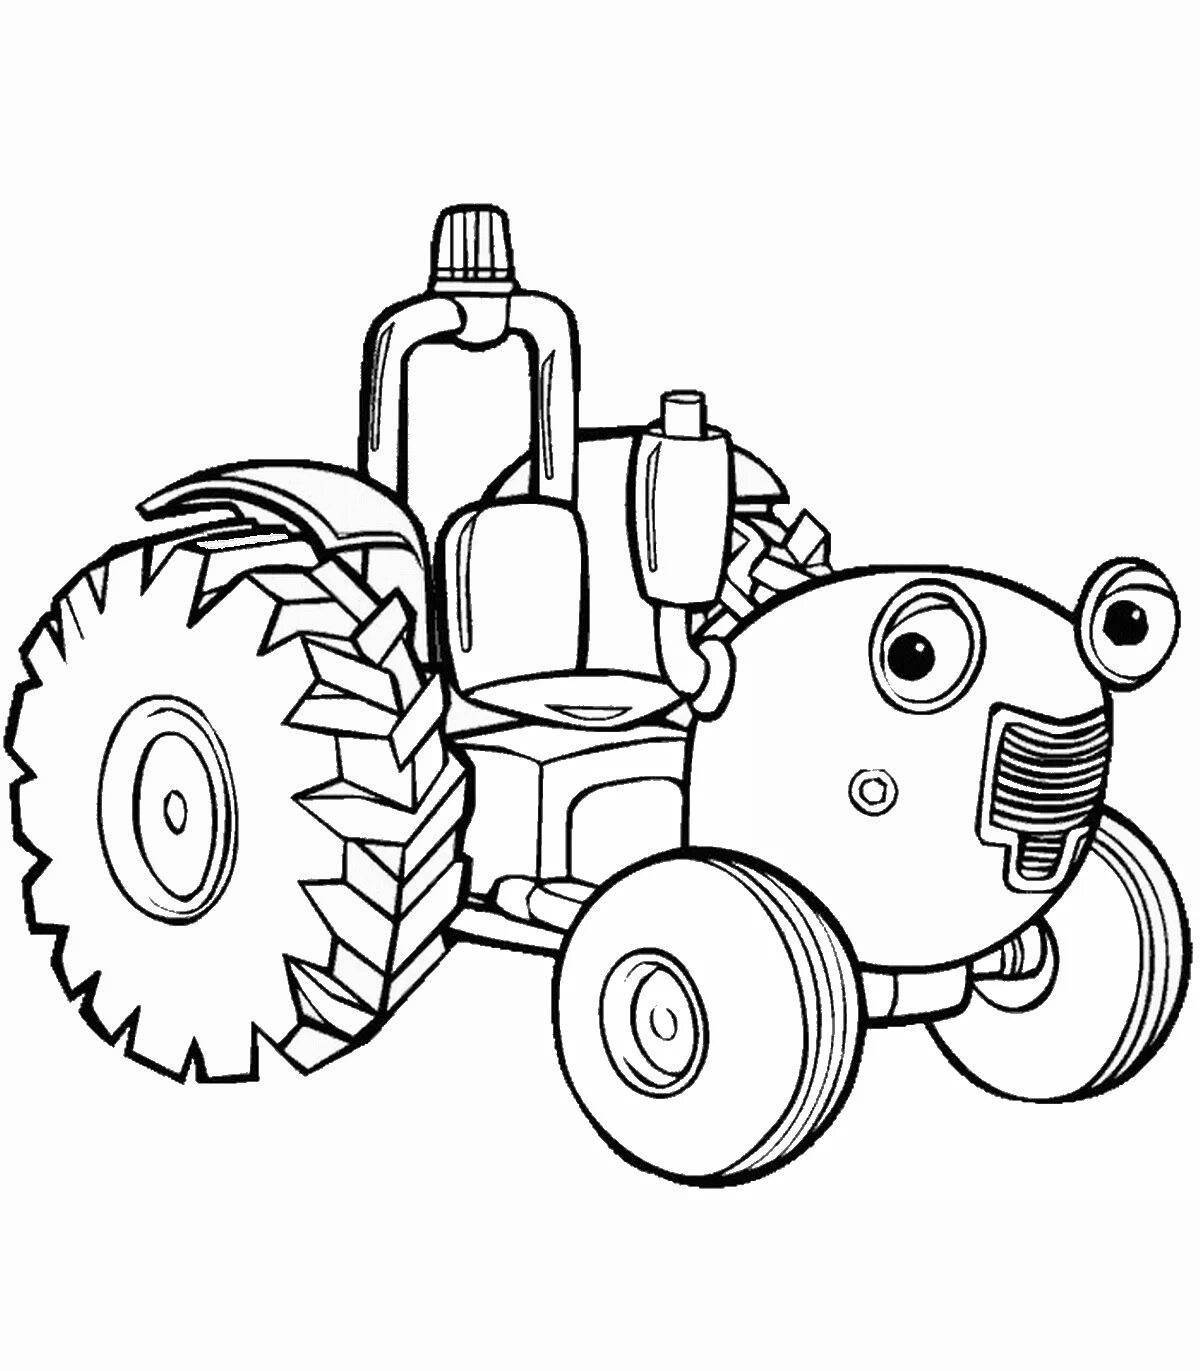 Bold drawing of a tractor